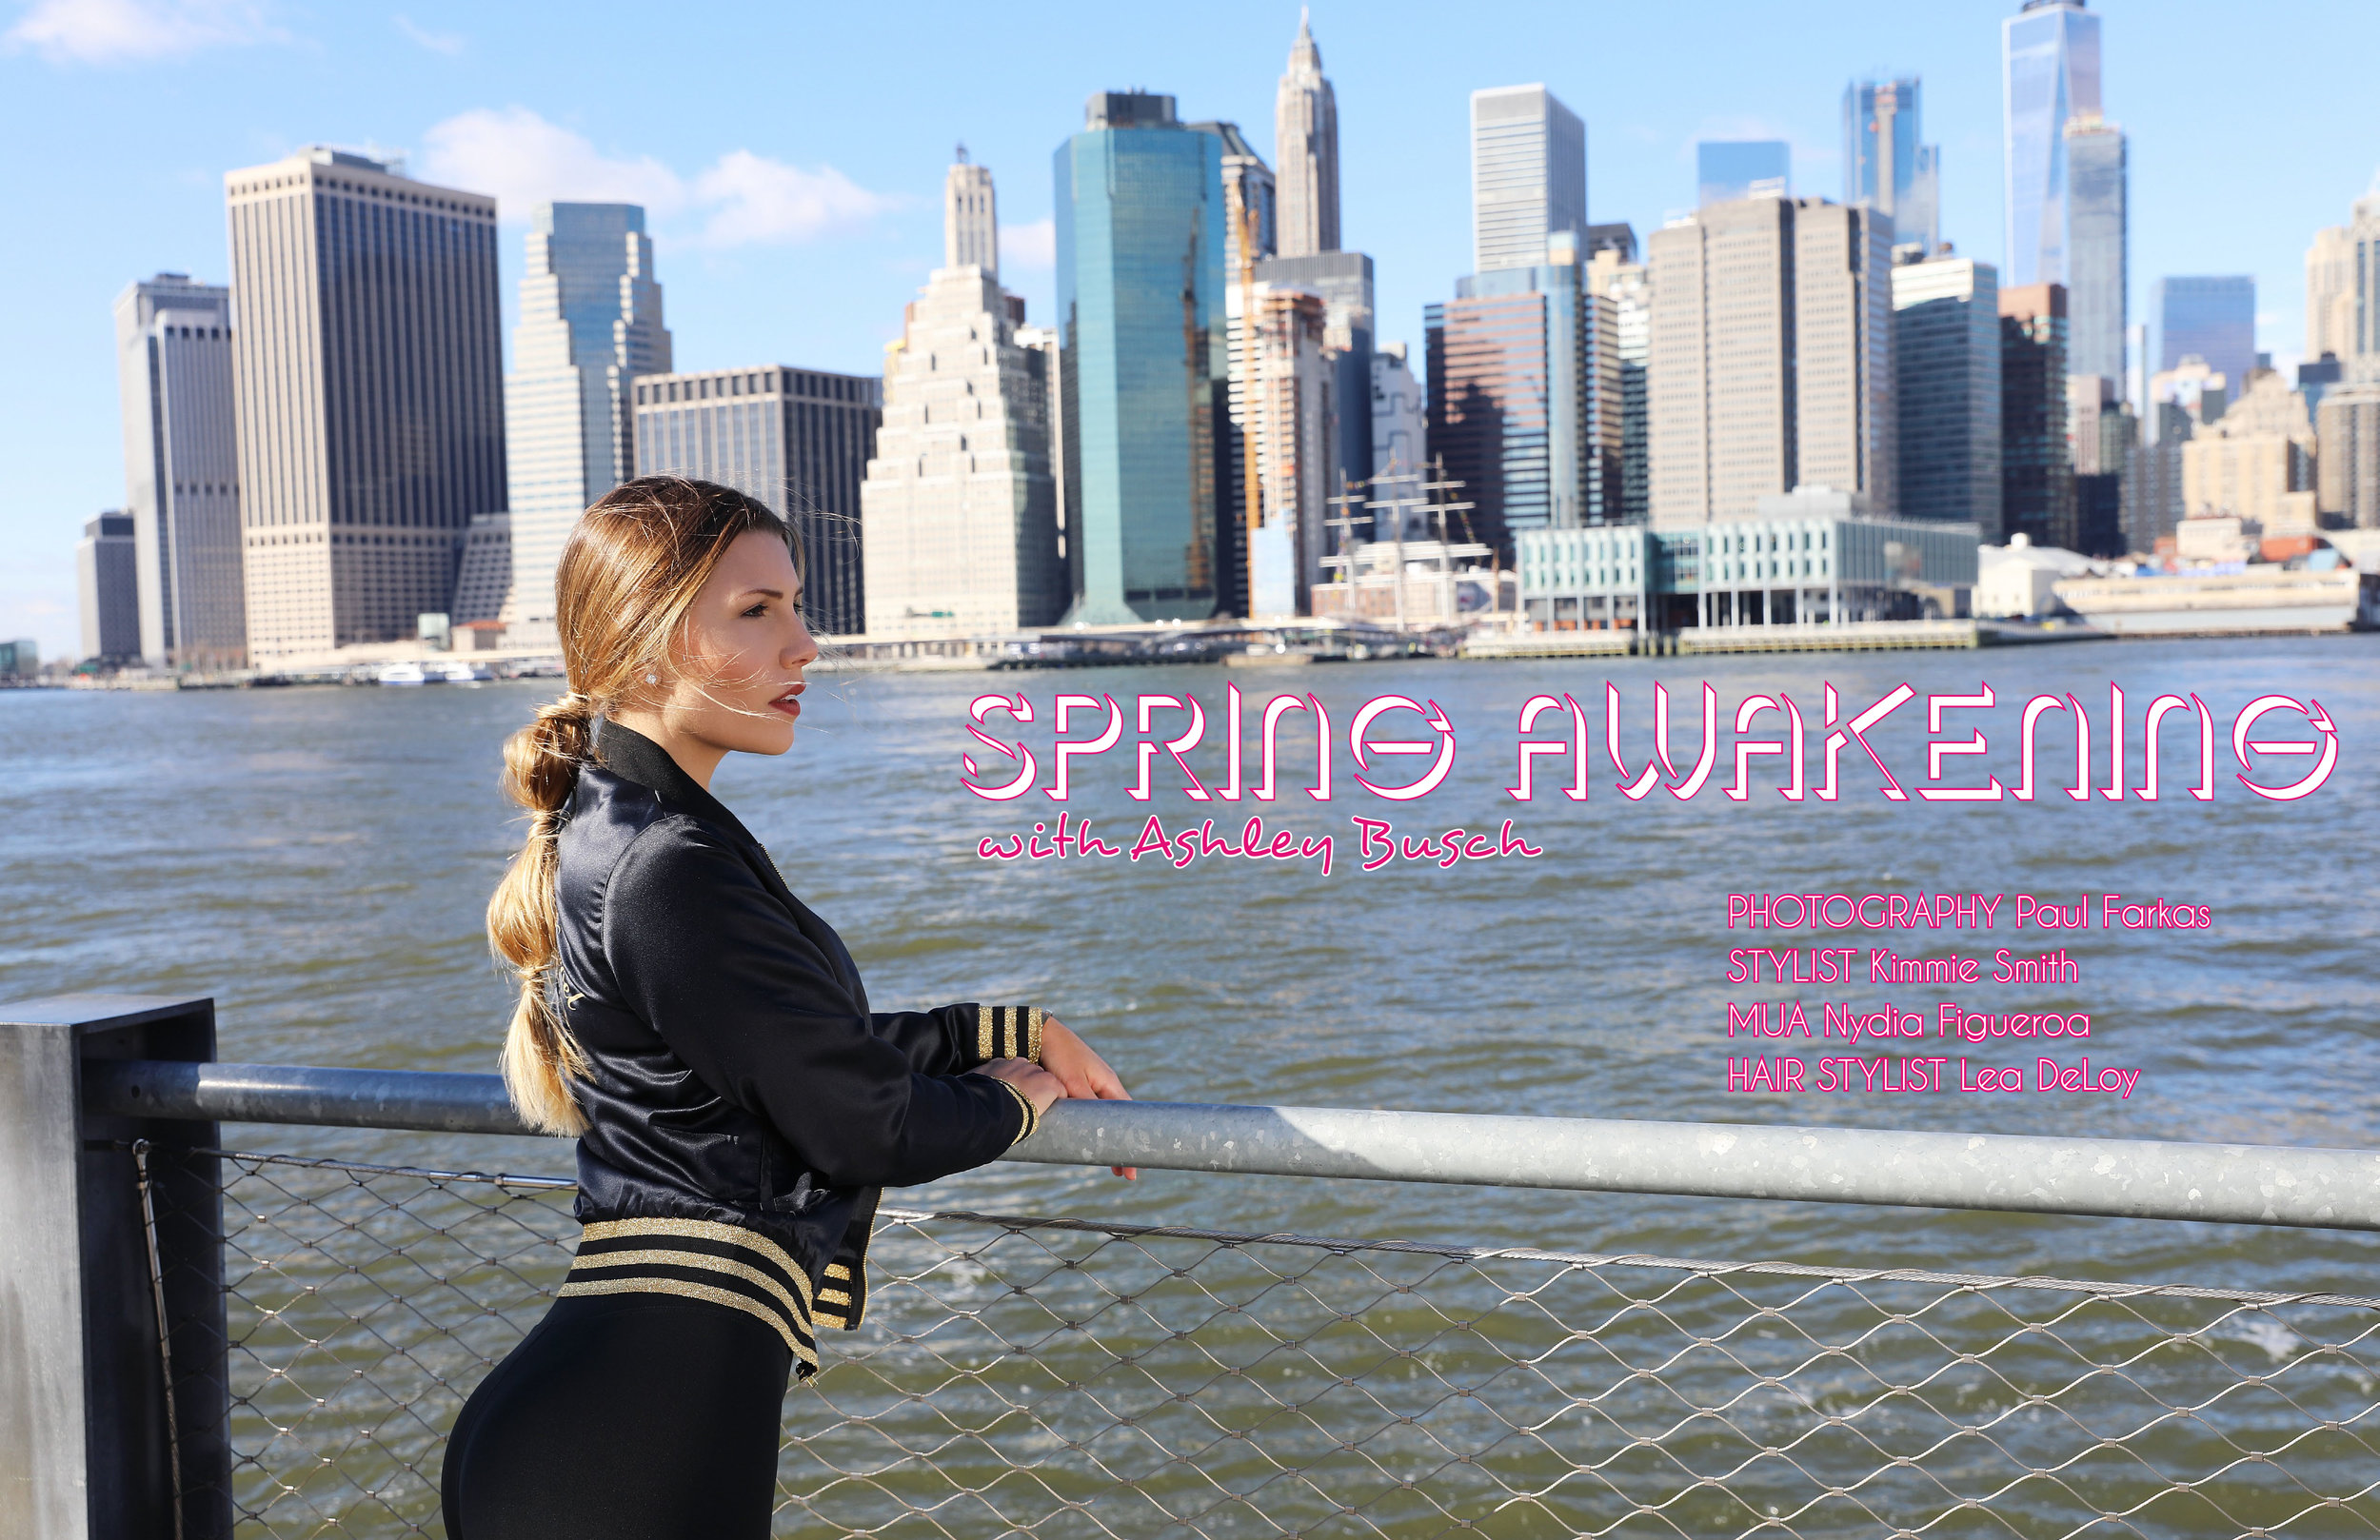 ATHLEISURE MAG MAR ISSUE WITH OUR CELEBRITY COVER, US POLO PLAYER Ashley Busch